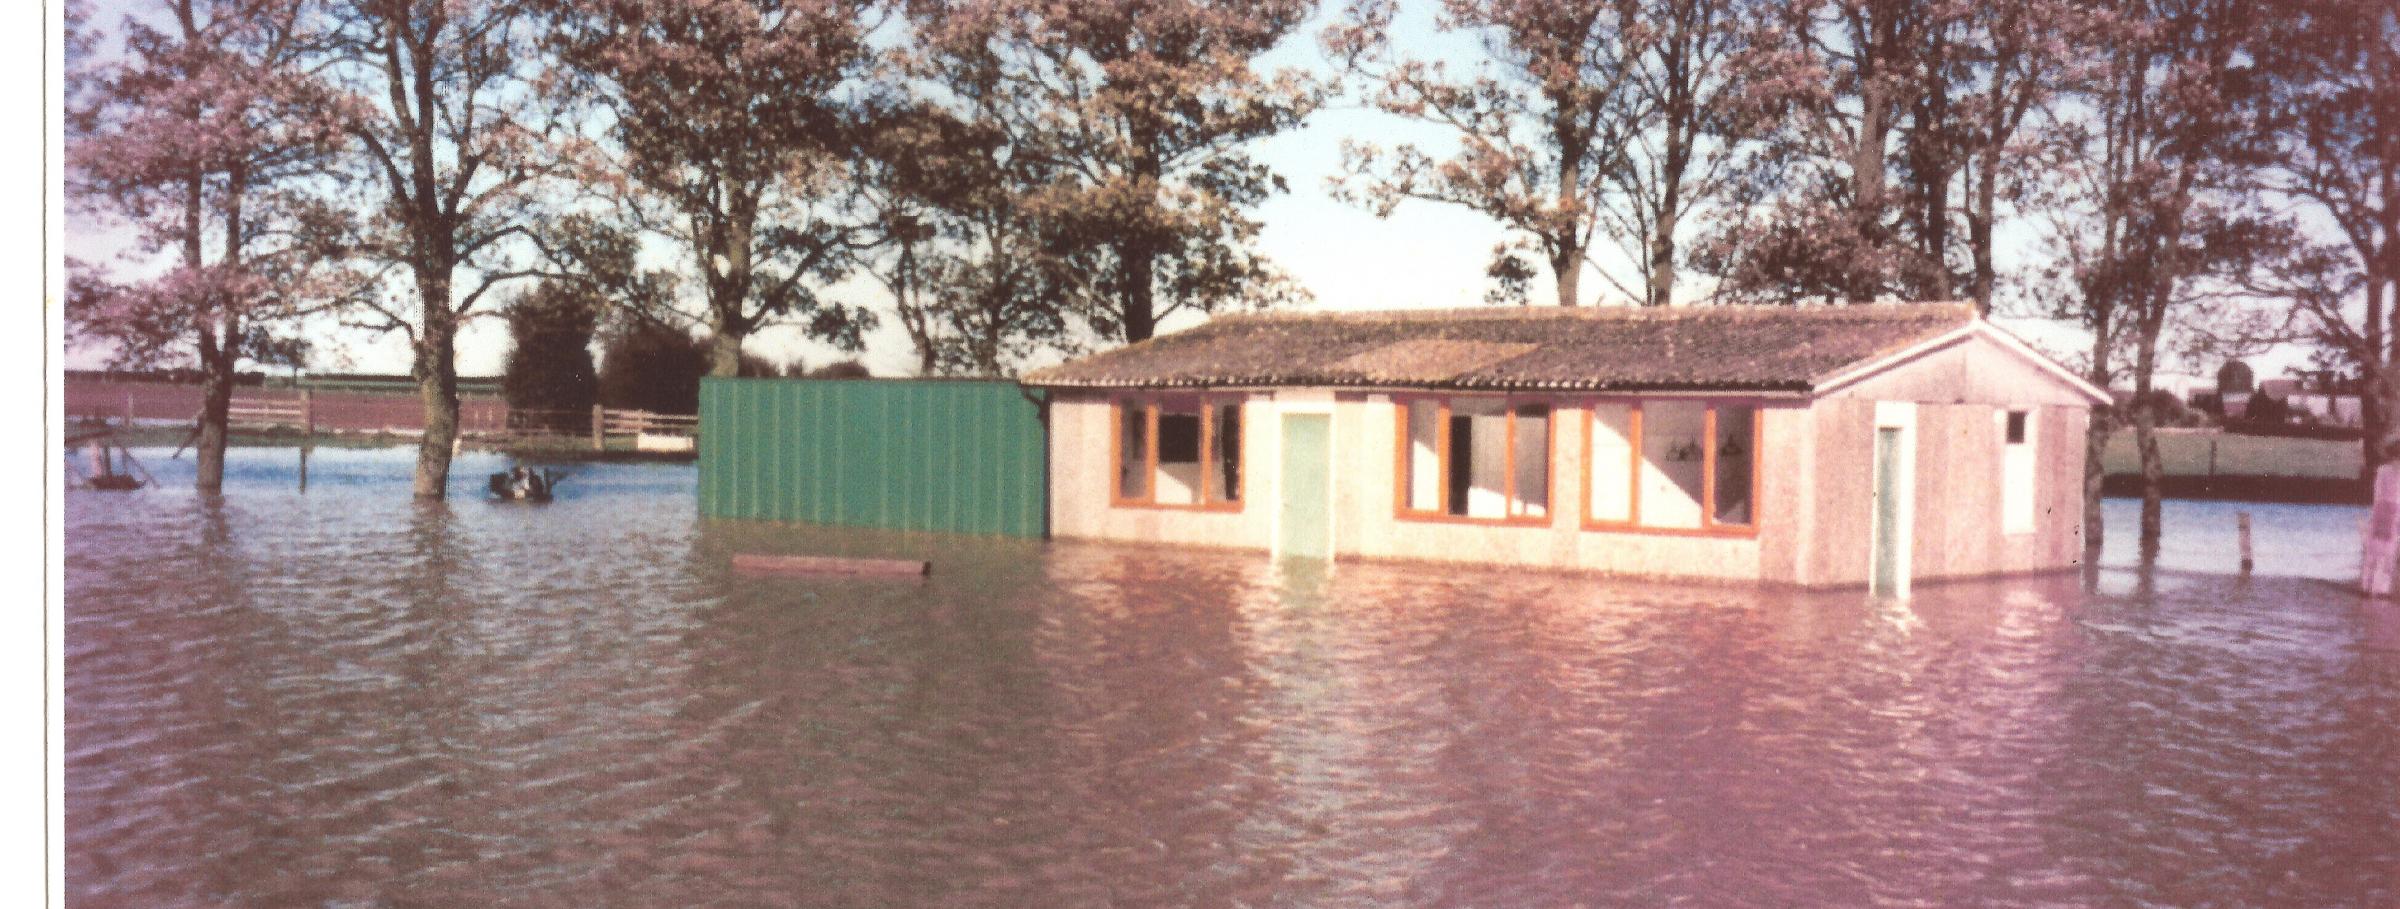 The only known picture of Great Smeaton Cricket Club pavilion that survives, and it shows it underwater in 2001, probably because a drain had become blocked